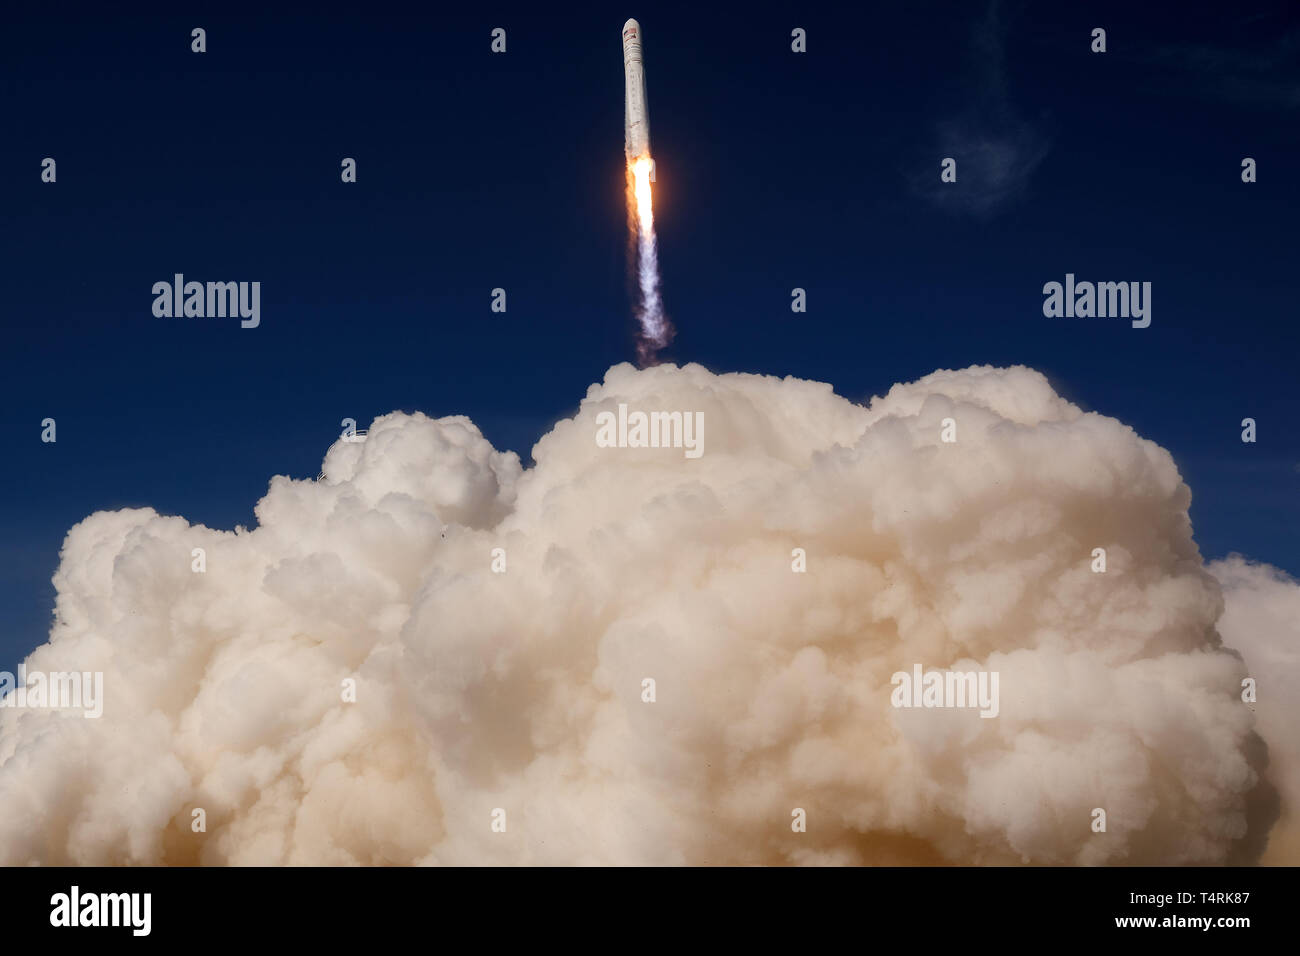 (190419) -- BEIJING, April 19, 2019 (Xinhua) -- The Antares rocket carrying the Cygnus cargo spacecraft lifts off from NASA's Wallops Flight Facility in Wallops Island, Virginia, the United States, on April 17, 2019. A U.S. rocket was launched on Wednesday from NASA's Wallops Flight Facility on Virginia's Eastern Shore, carrying cargo with the space agency's resupply mission for the International Space Station (ISS). The Antares rocket built by Northrop Grumman lifted off at 4:46 p.m. EDT, carrying the Cygnus cargo spacecraft to the ISS. The spacecraft successfully separated from the rocket ab Stock Photo